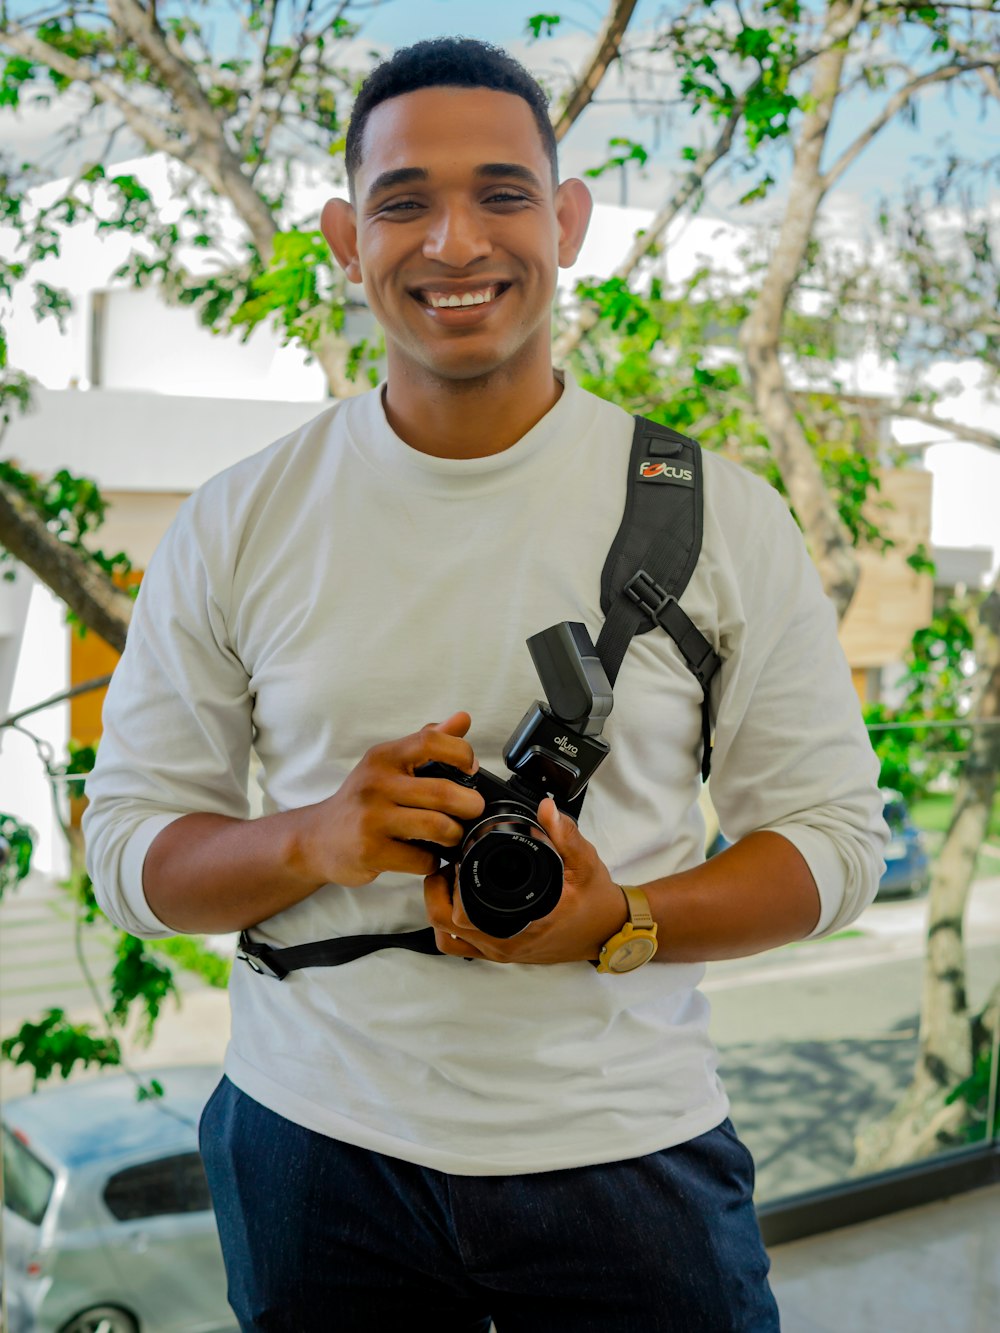 a man is holding a camera and smiling